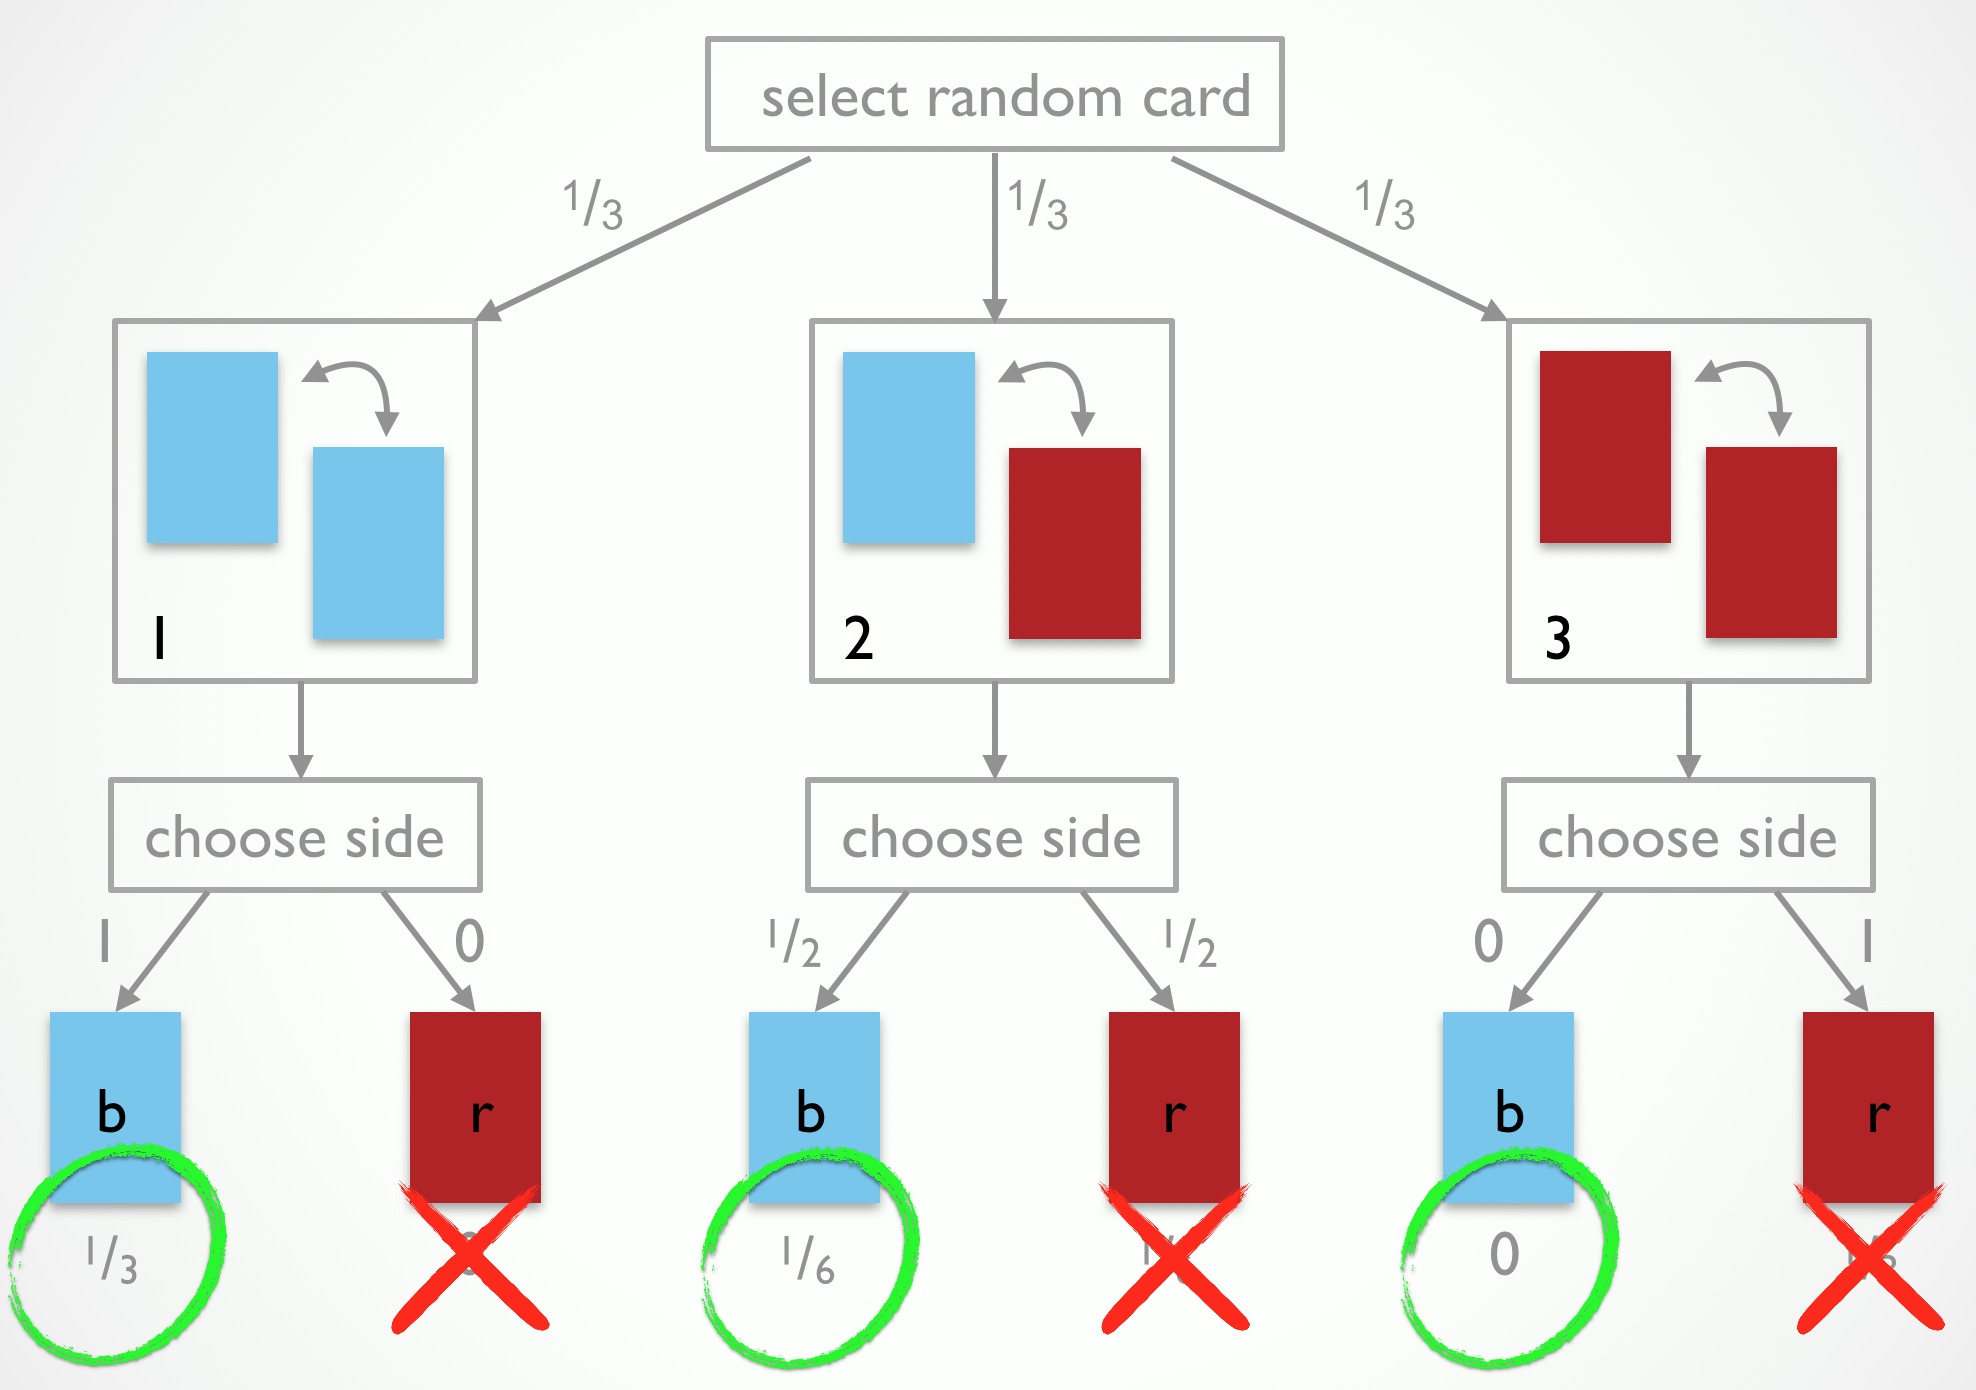 The observation-generating process for the 3-card problem after eliminating outcomes incompatible with the observation 'blue'.